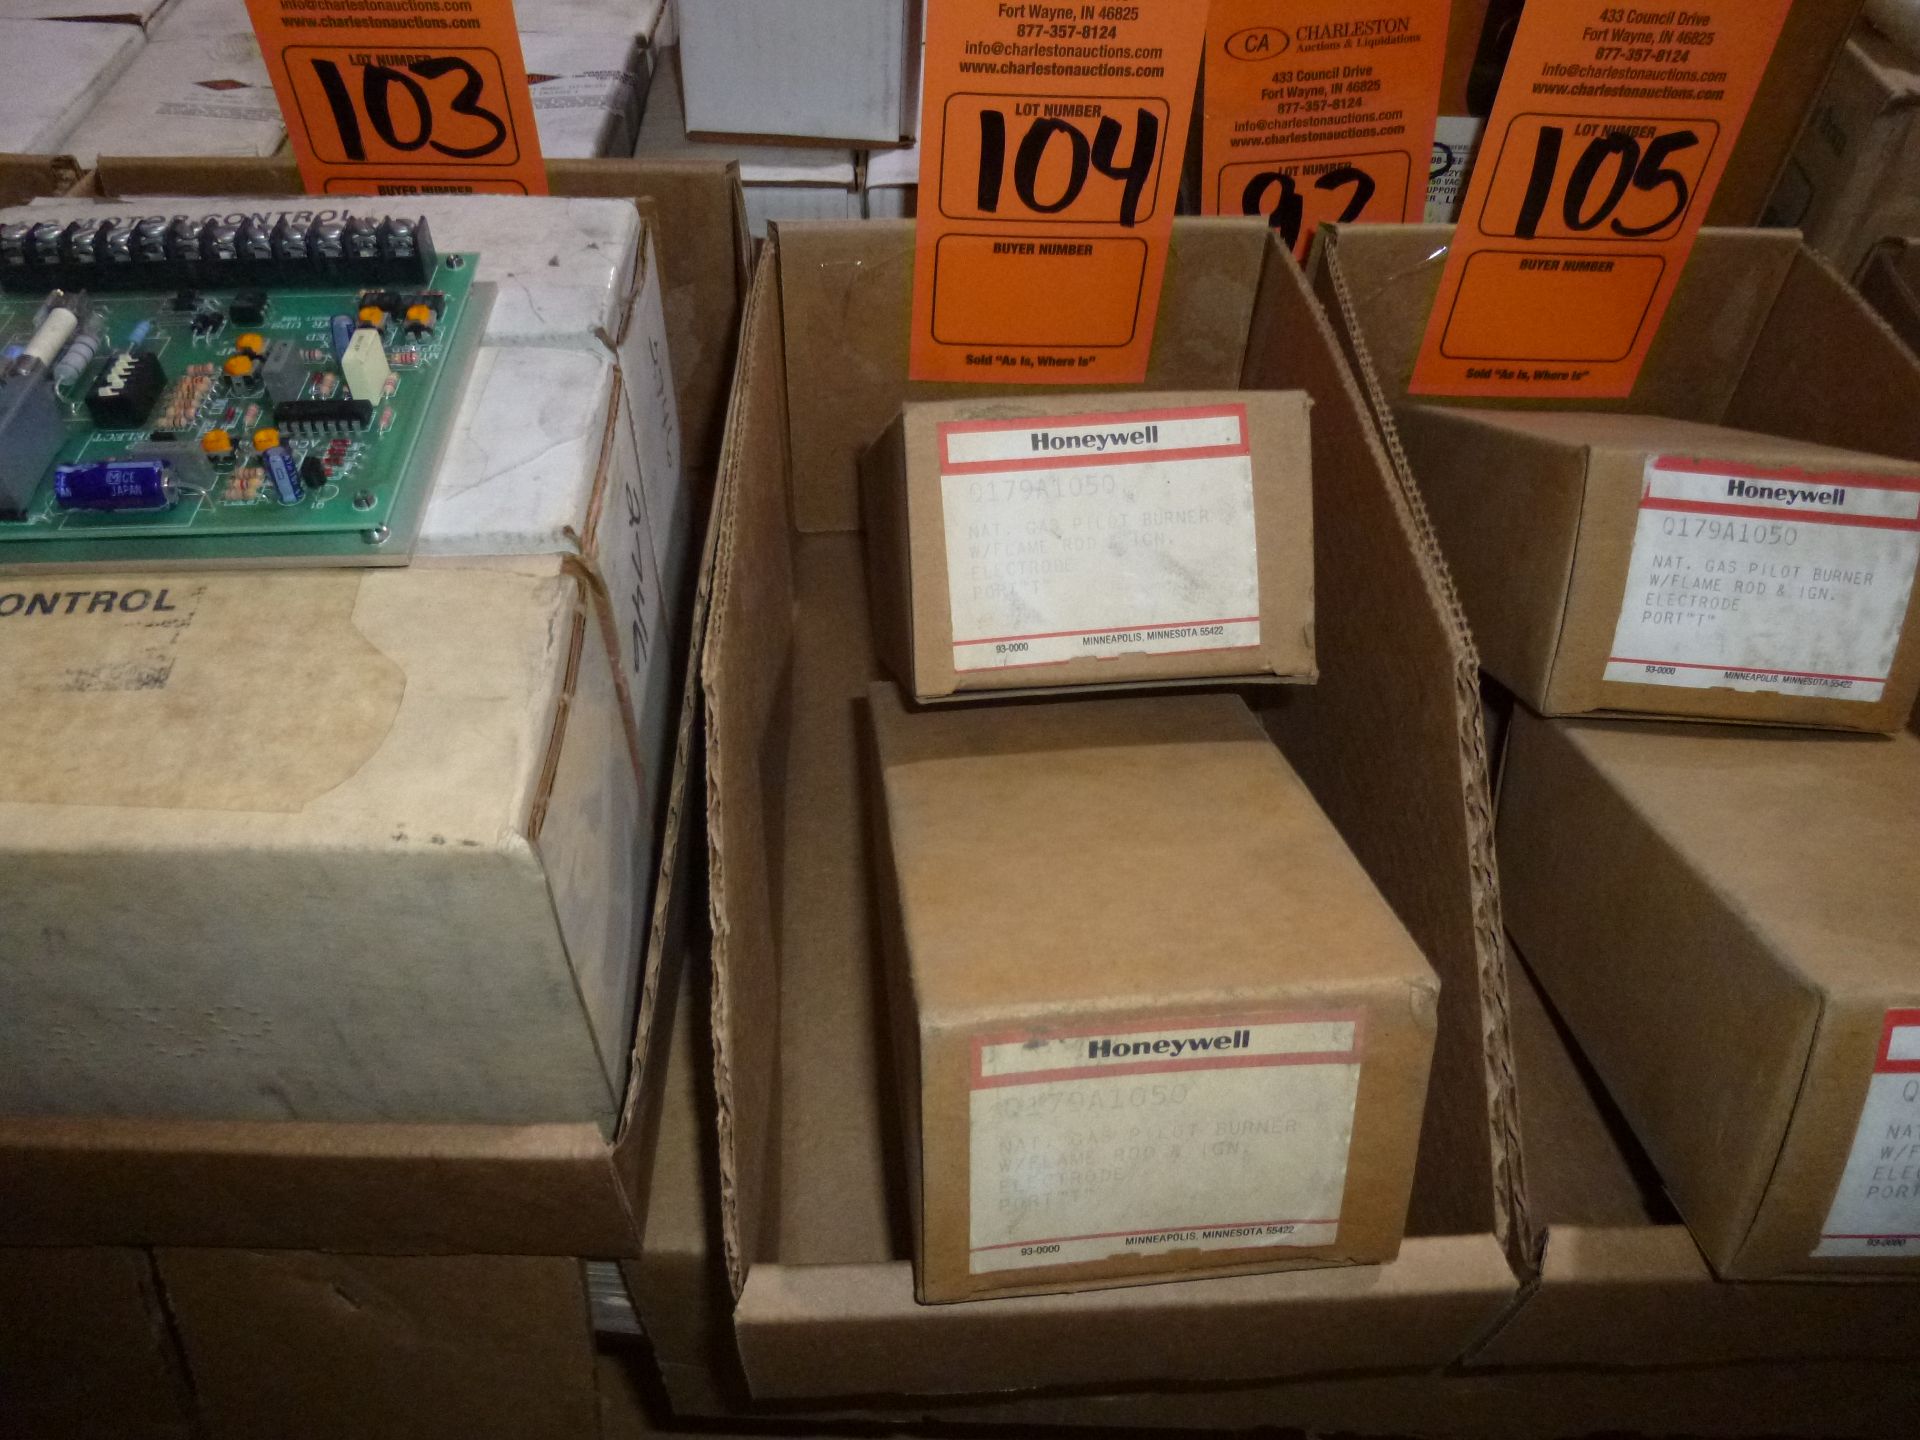 Qty 2 Honeywell, model Q179a1050, new in factory boxes, as always with Brolyn LLC auctions, all lots